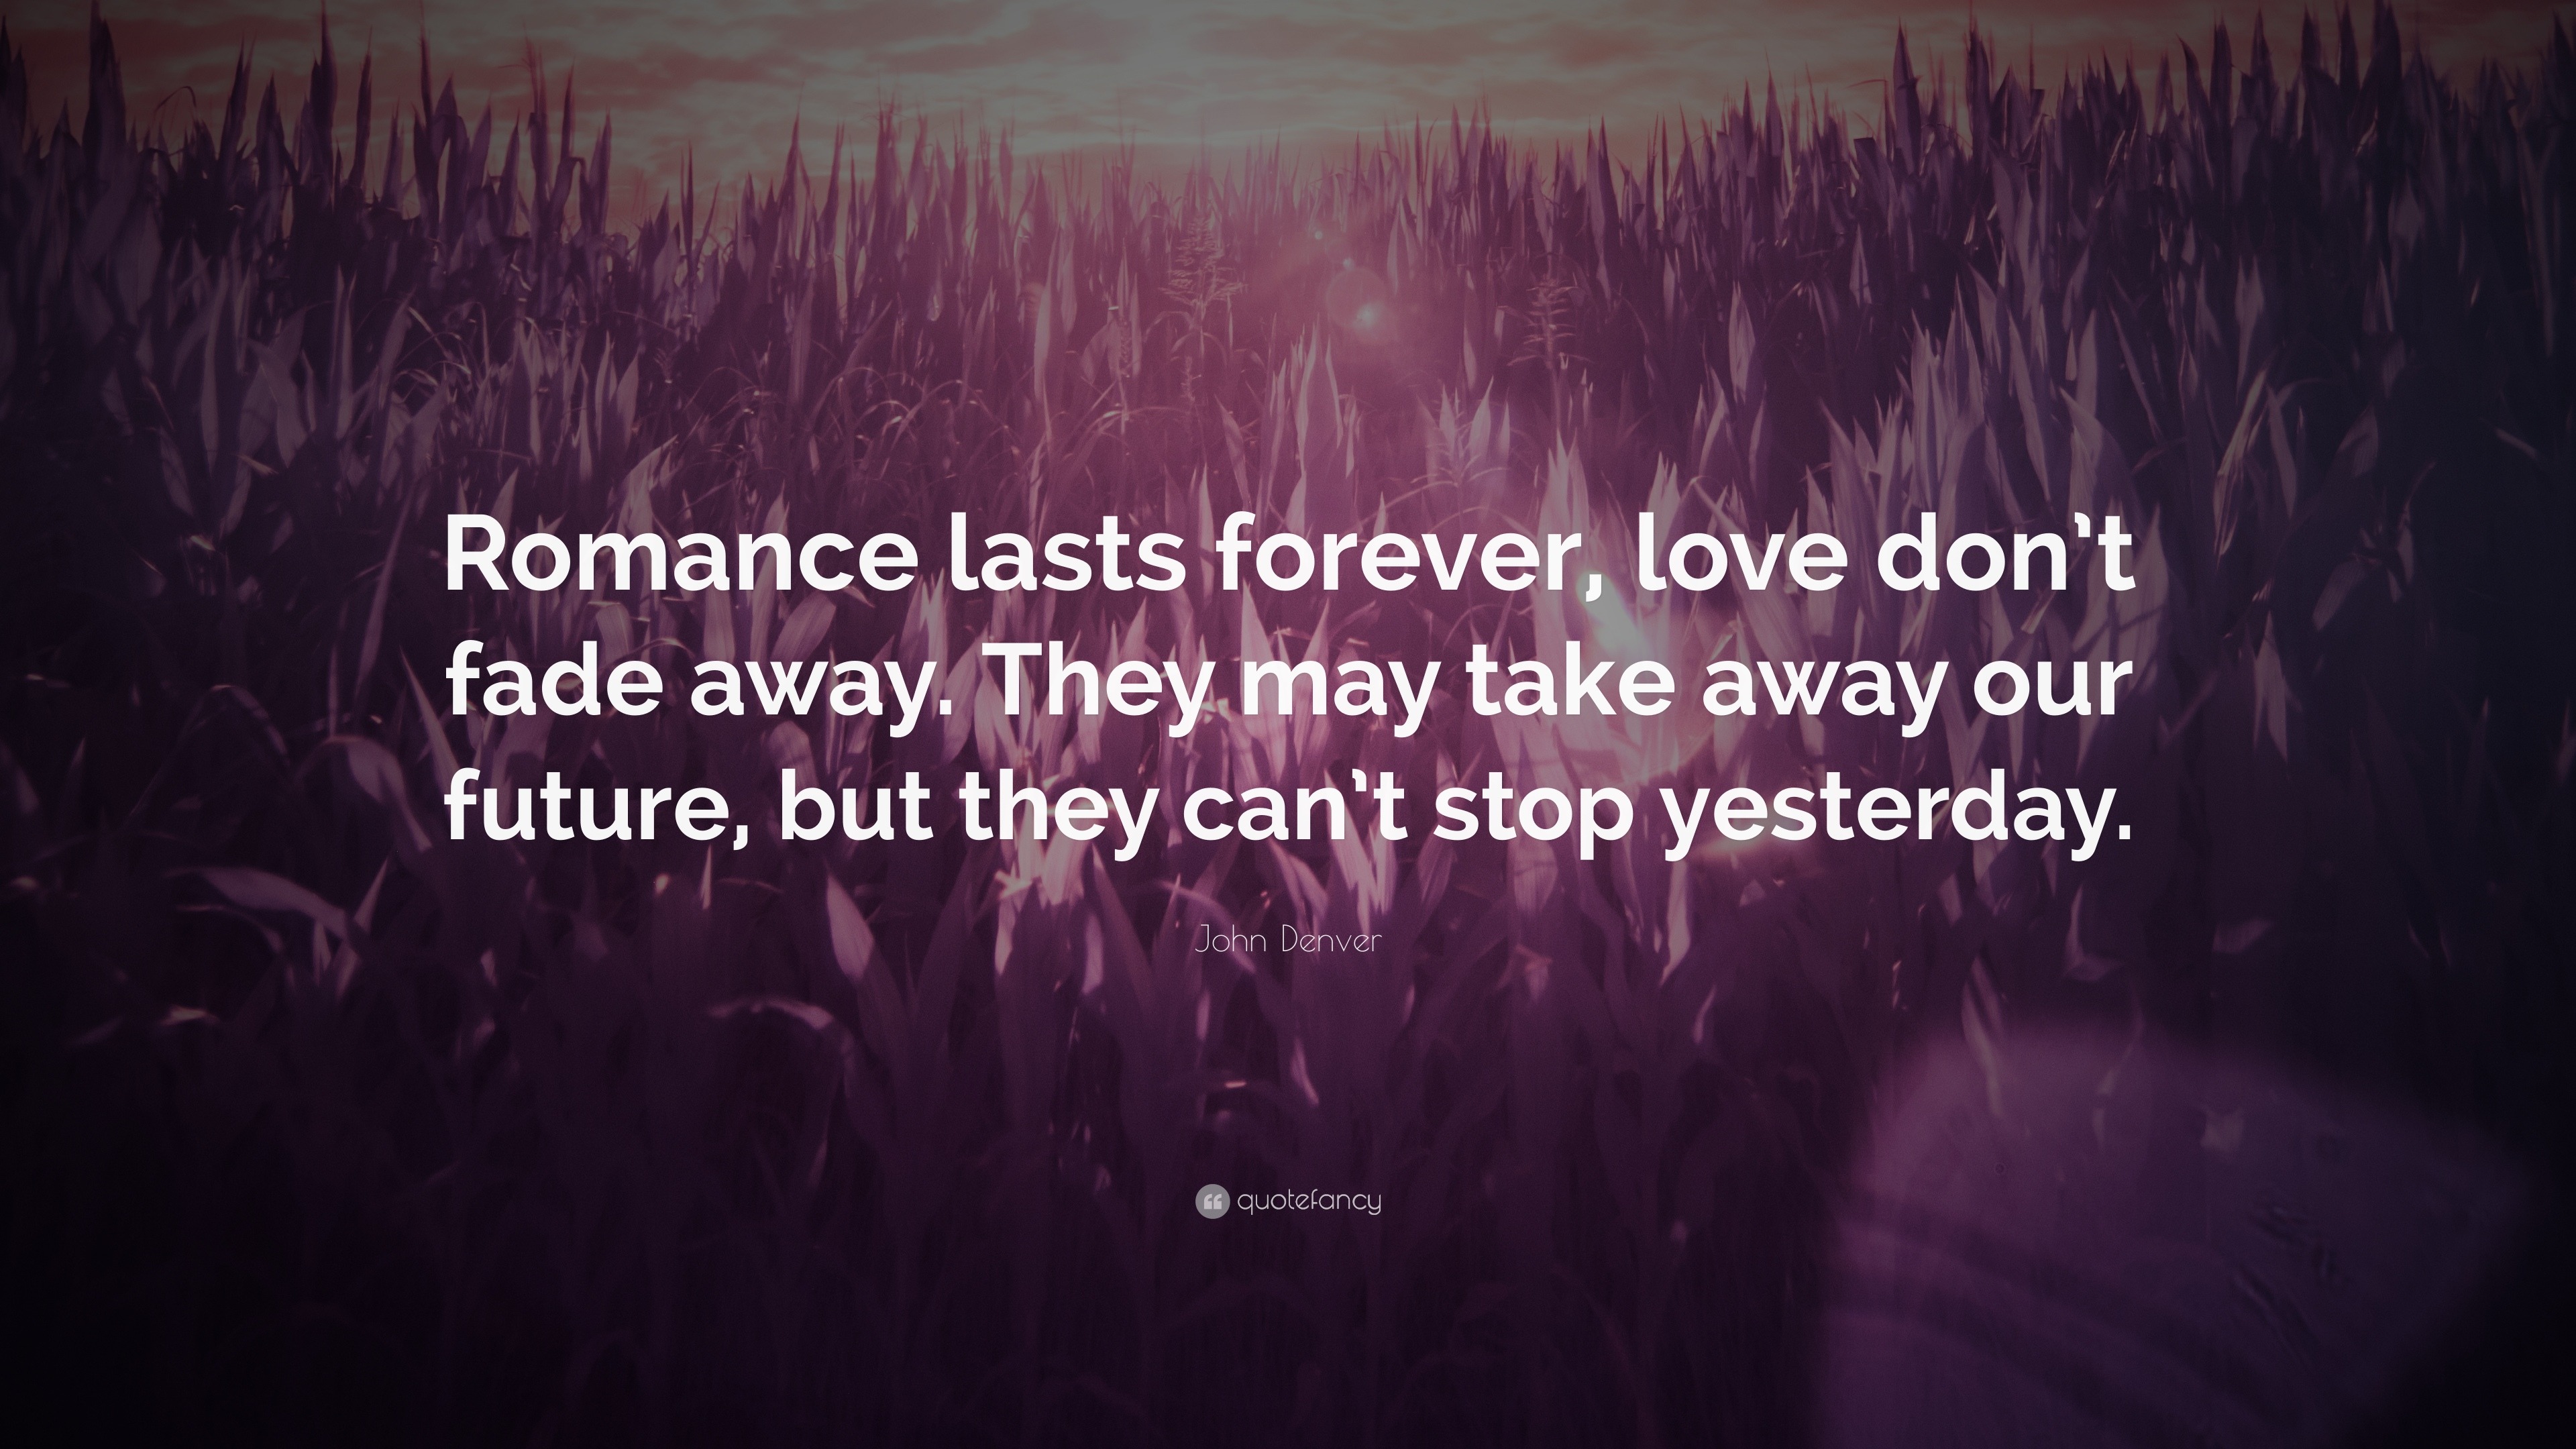 John Denver Quote: “Romance lasts forever, love don't fade away